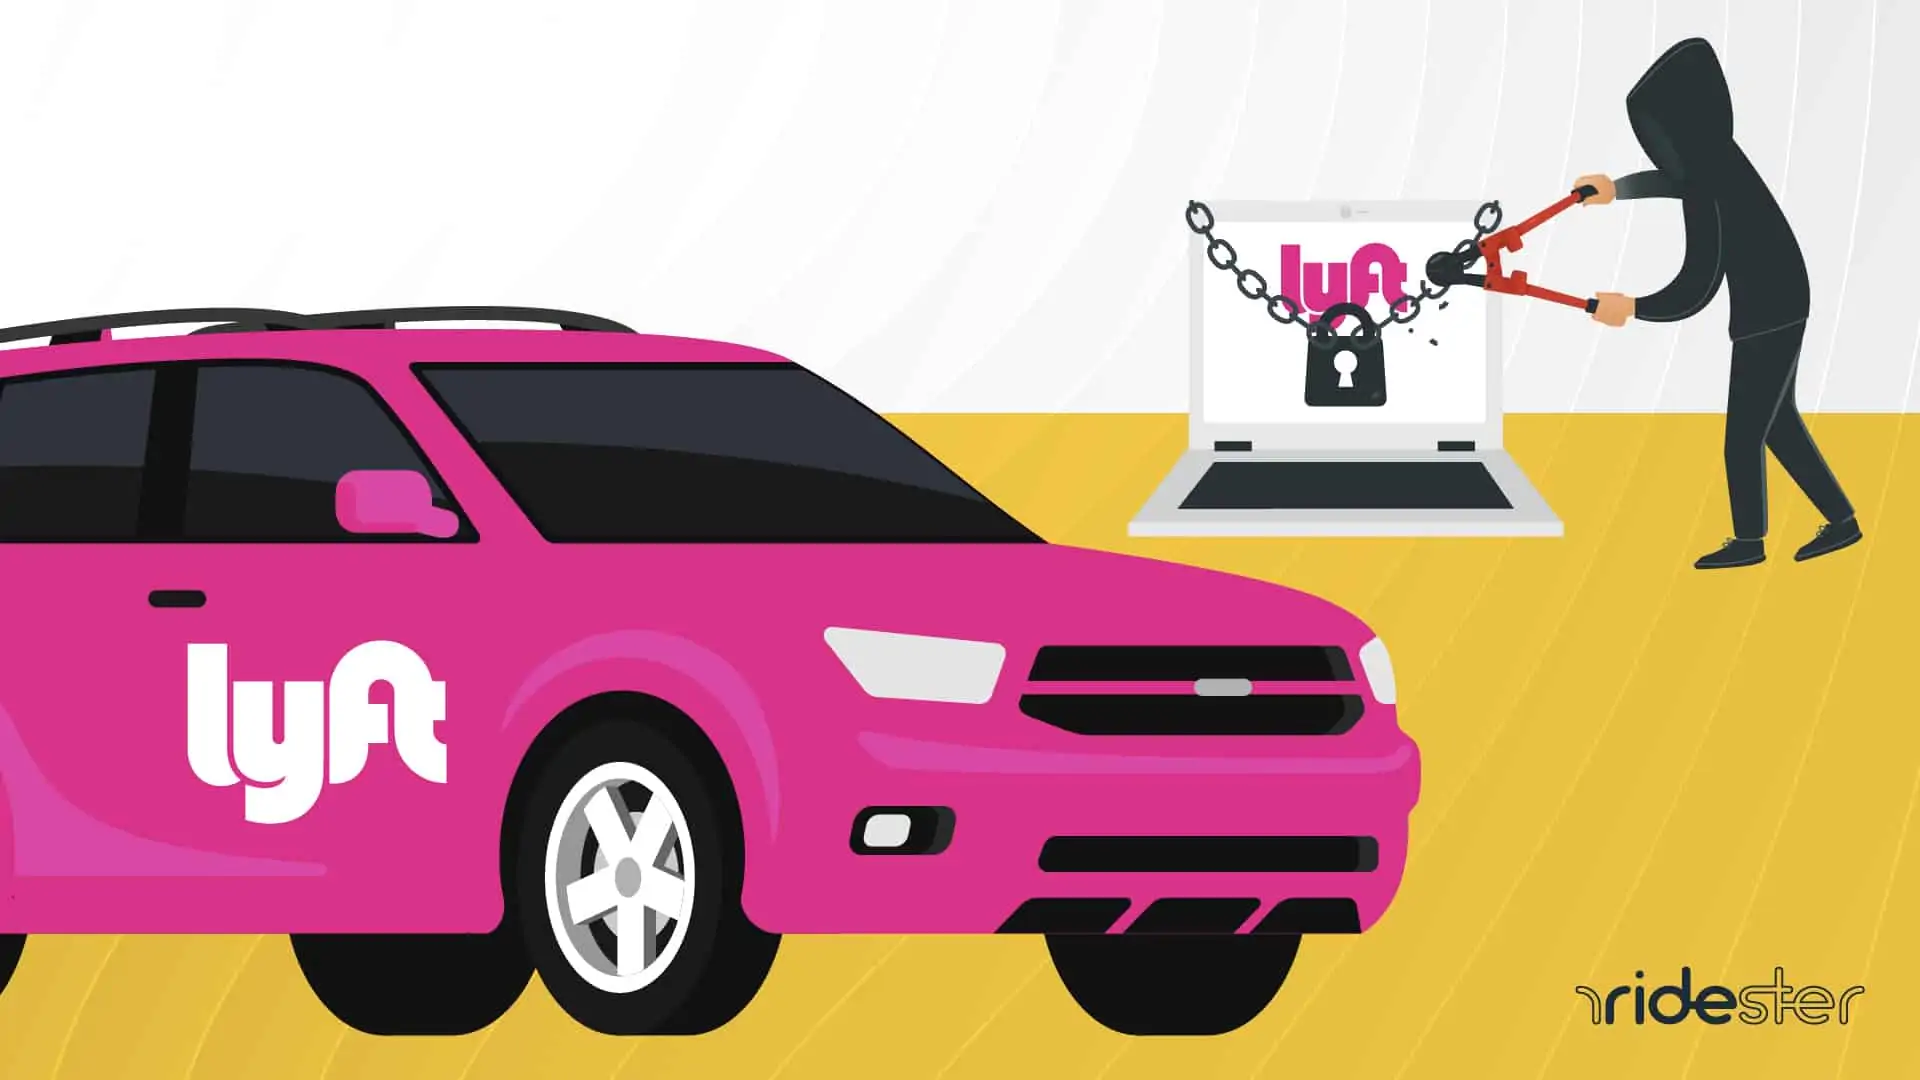 vector graphic showing a lyft vehicle in the foreground and in the background a guy implementing a Lyft free ride hack on a computer